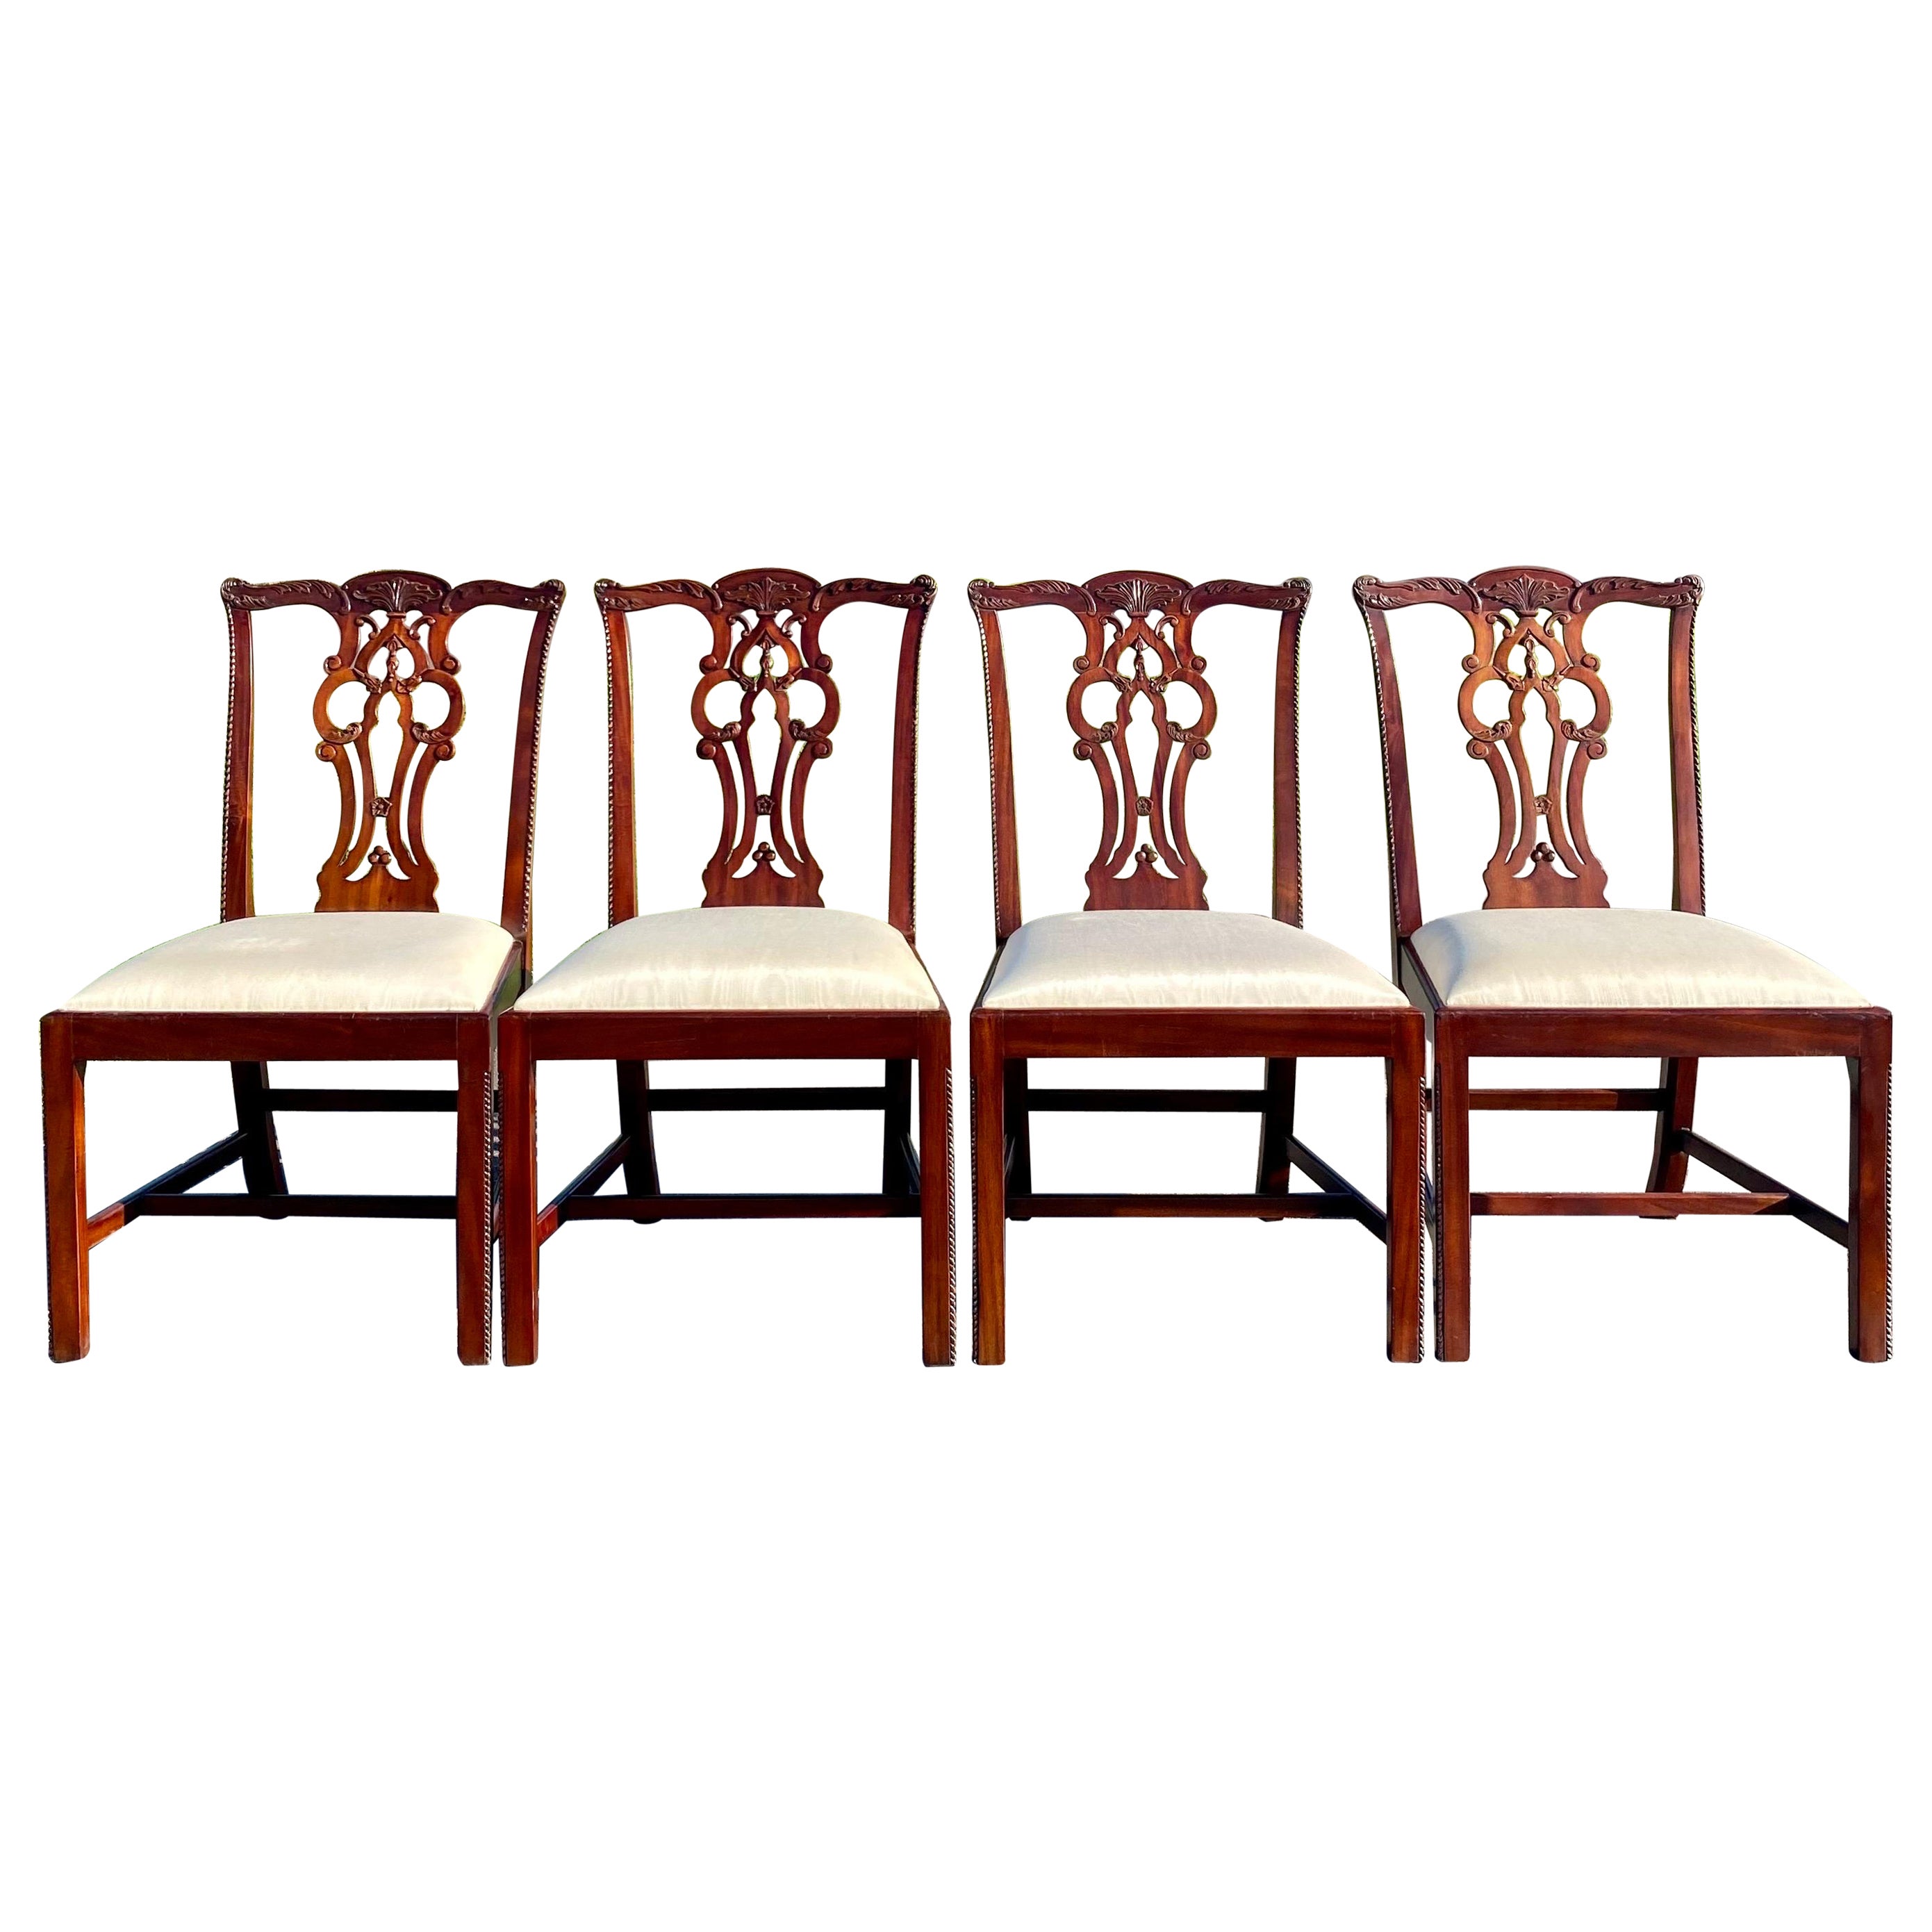 Maitland Smith Chippendale Regency Carved Mahogany Dining Side Chairs For Sale